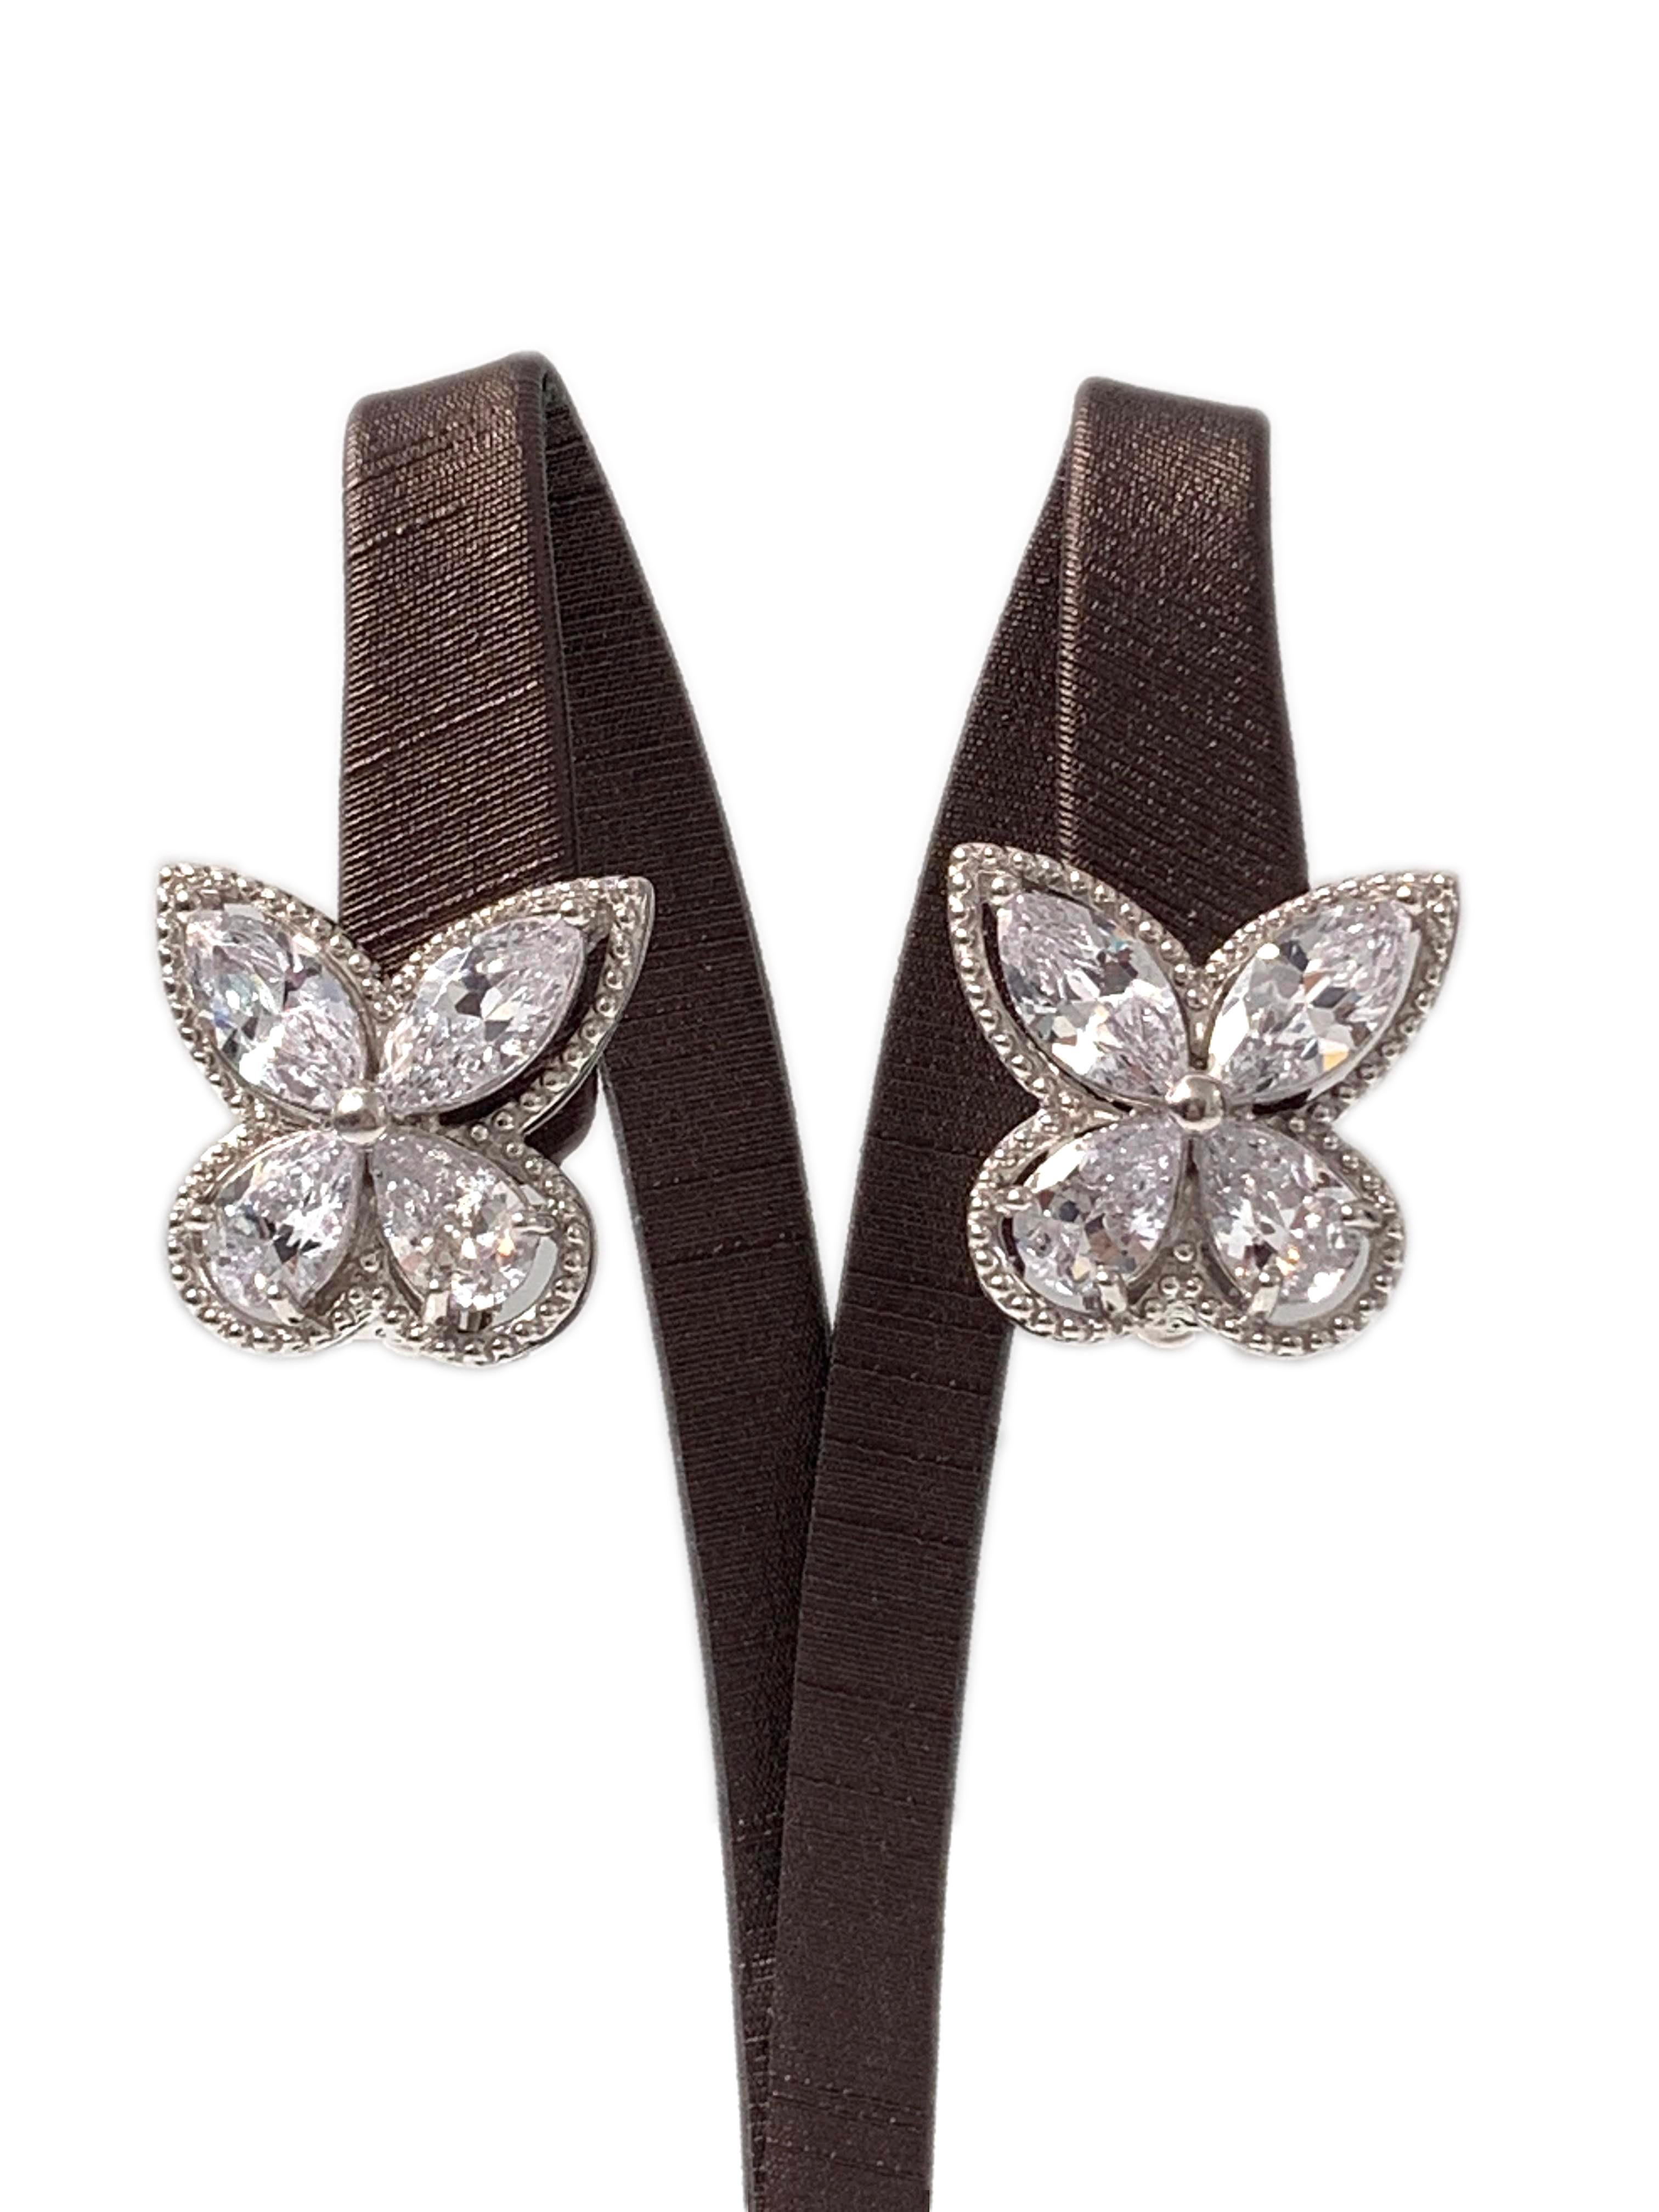 Fabulous Large Butterfly Faux Diamond CZ Clip-on Earrings

These earrings feature top quality marquis and pear shape cubic zirconia, handset in platinum rhodium plated sterling silver, and adorned with beaded trim. The earrings measure approximately